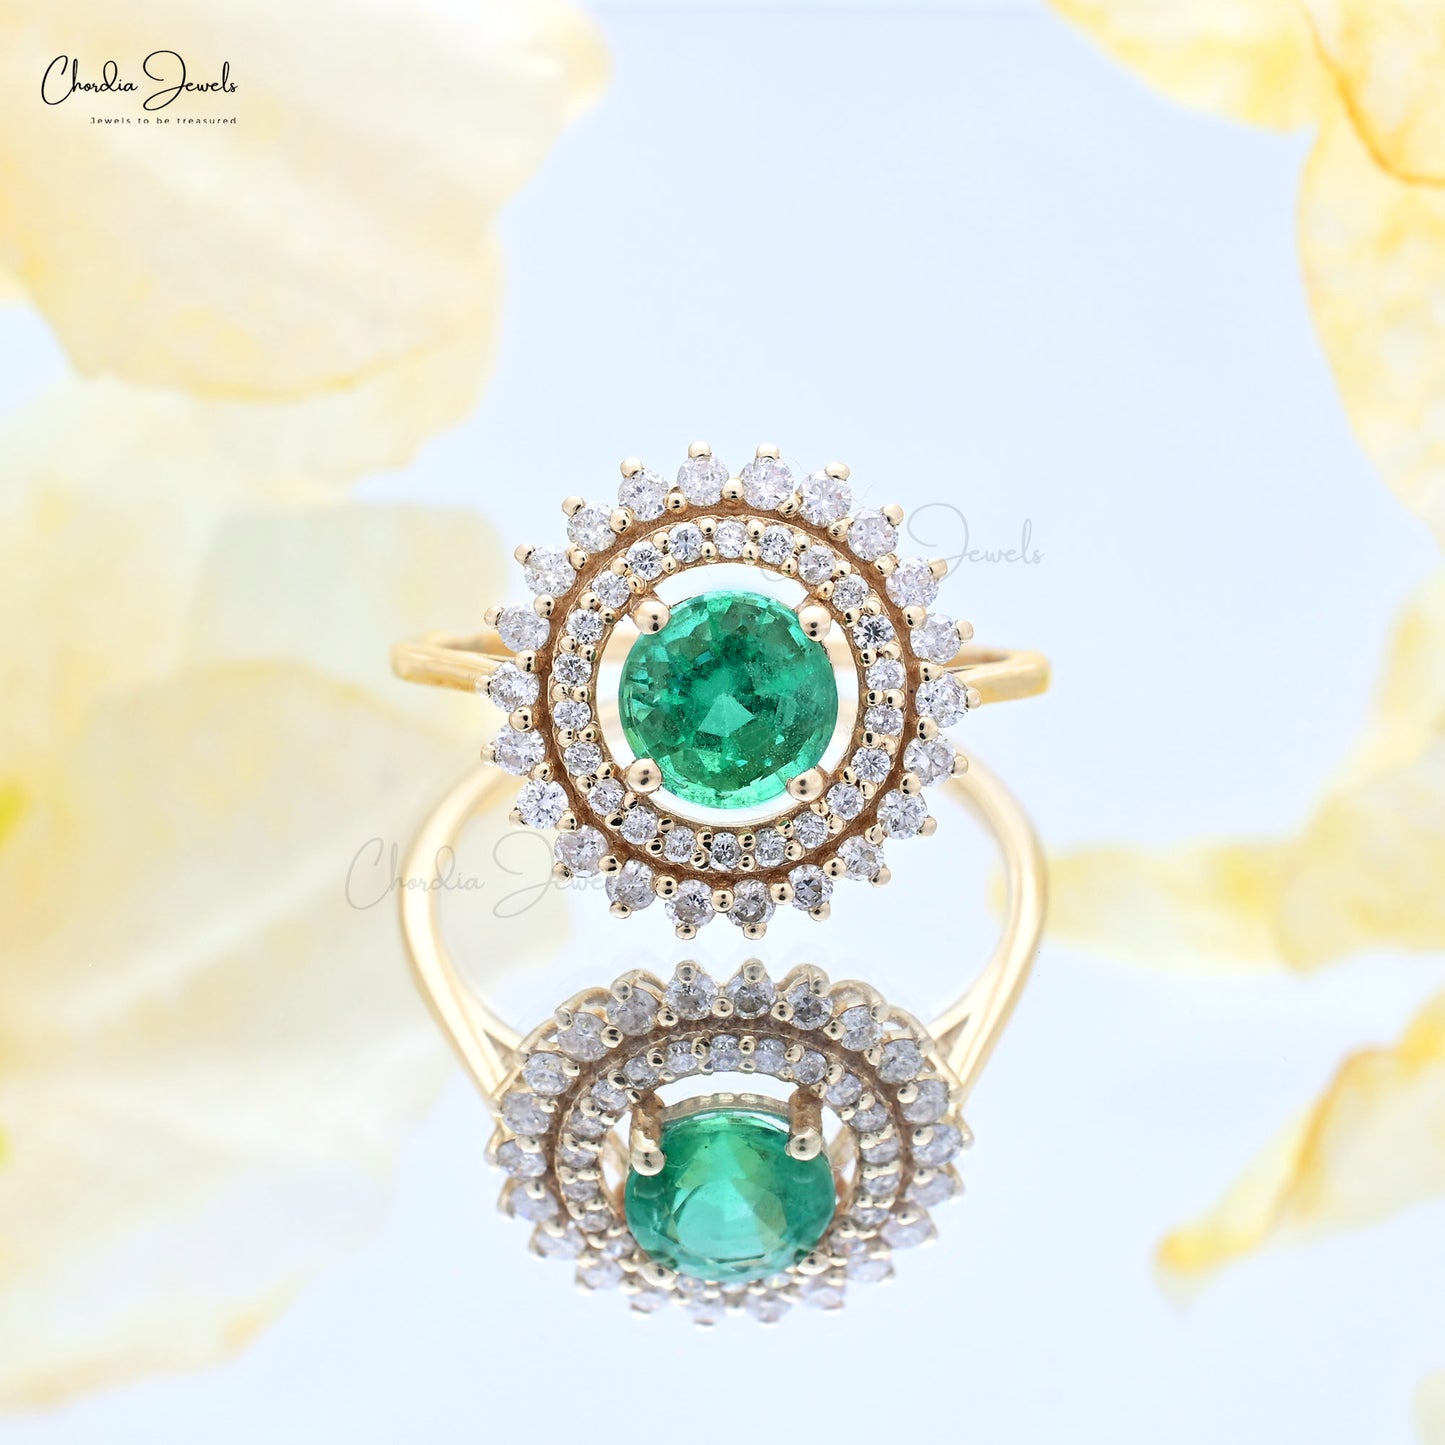 Enhance your personal style with this emerald statement ring.